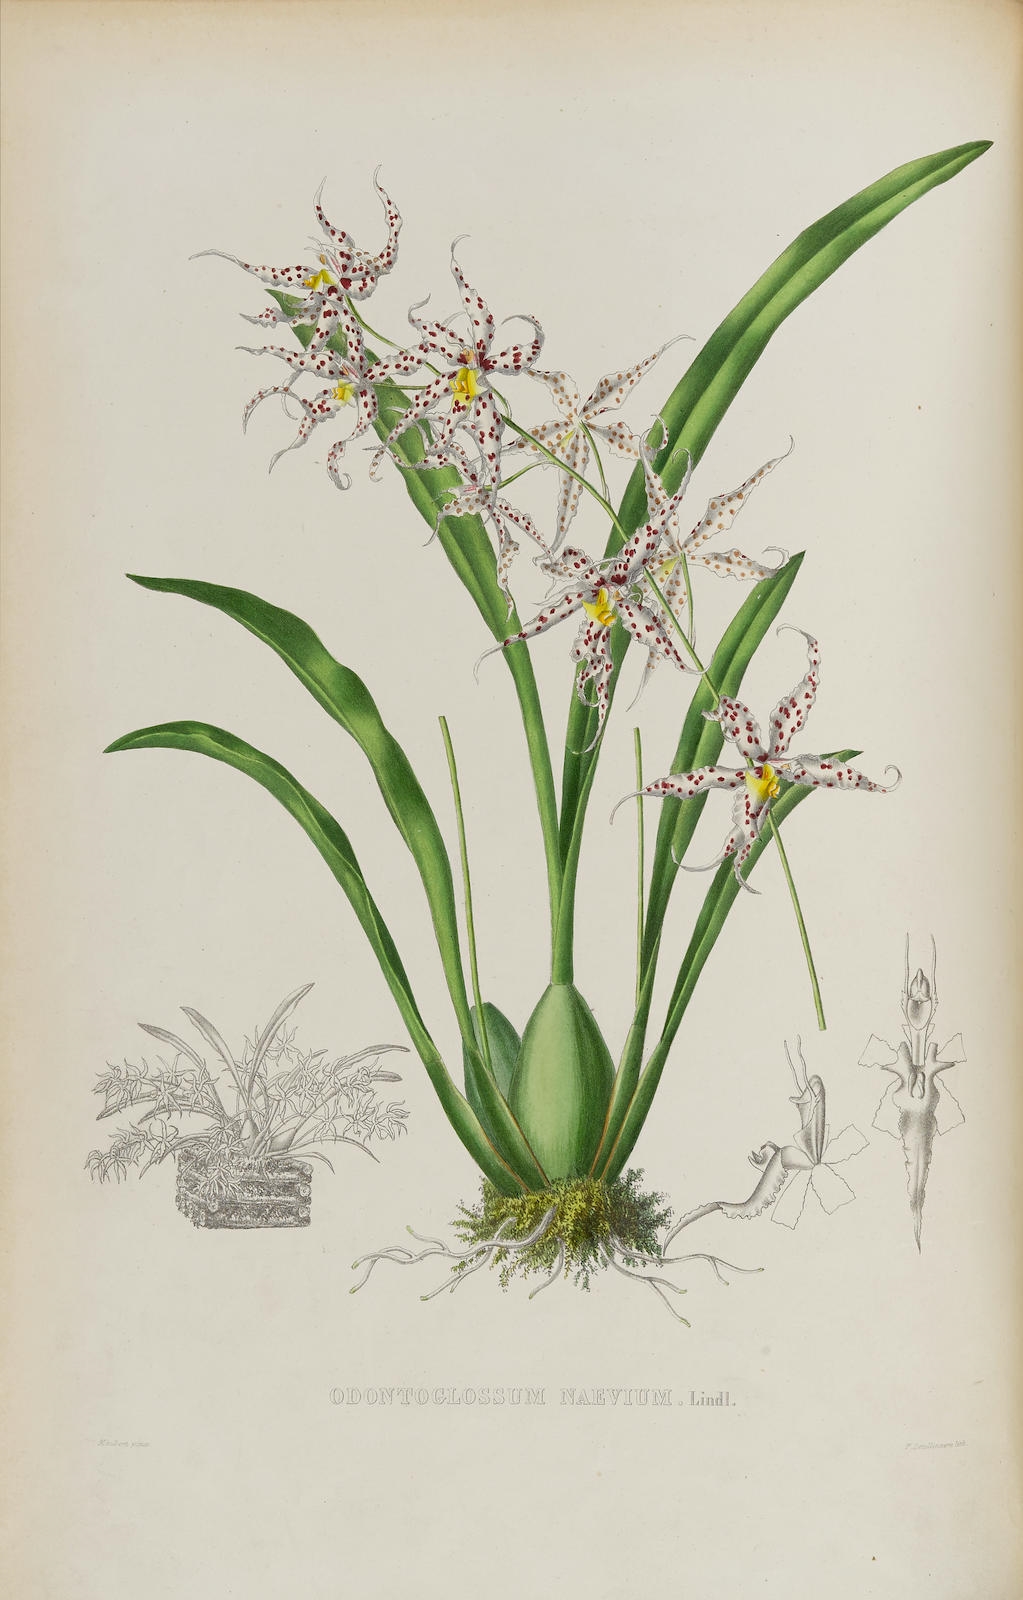 Pescatorea Iconographie des Orchidees,  Brussels by Jean Jules Linden, 1855-1860